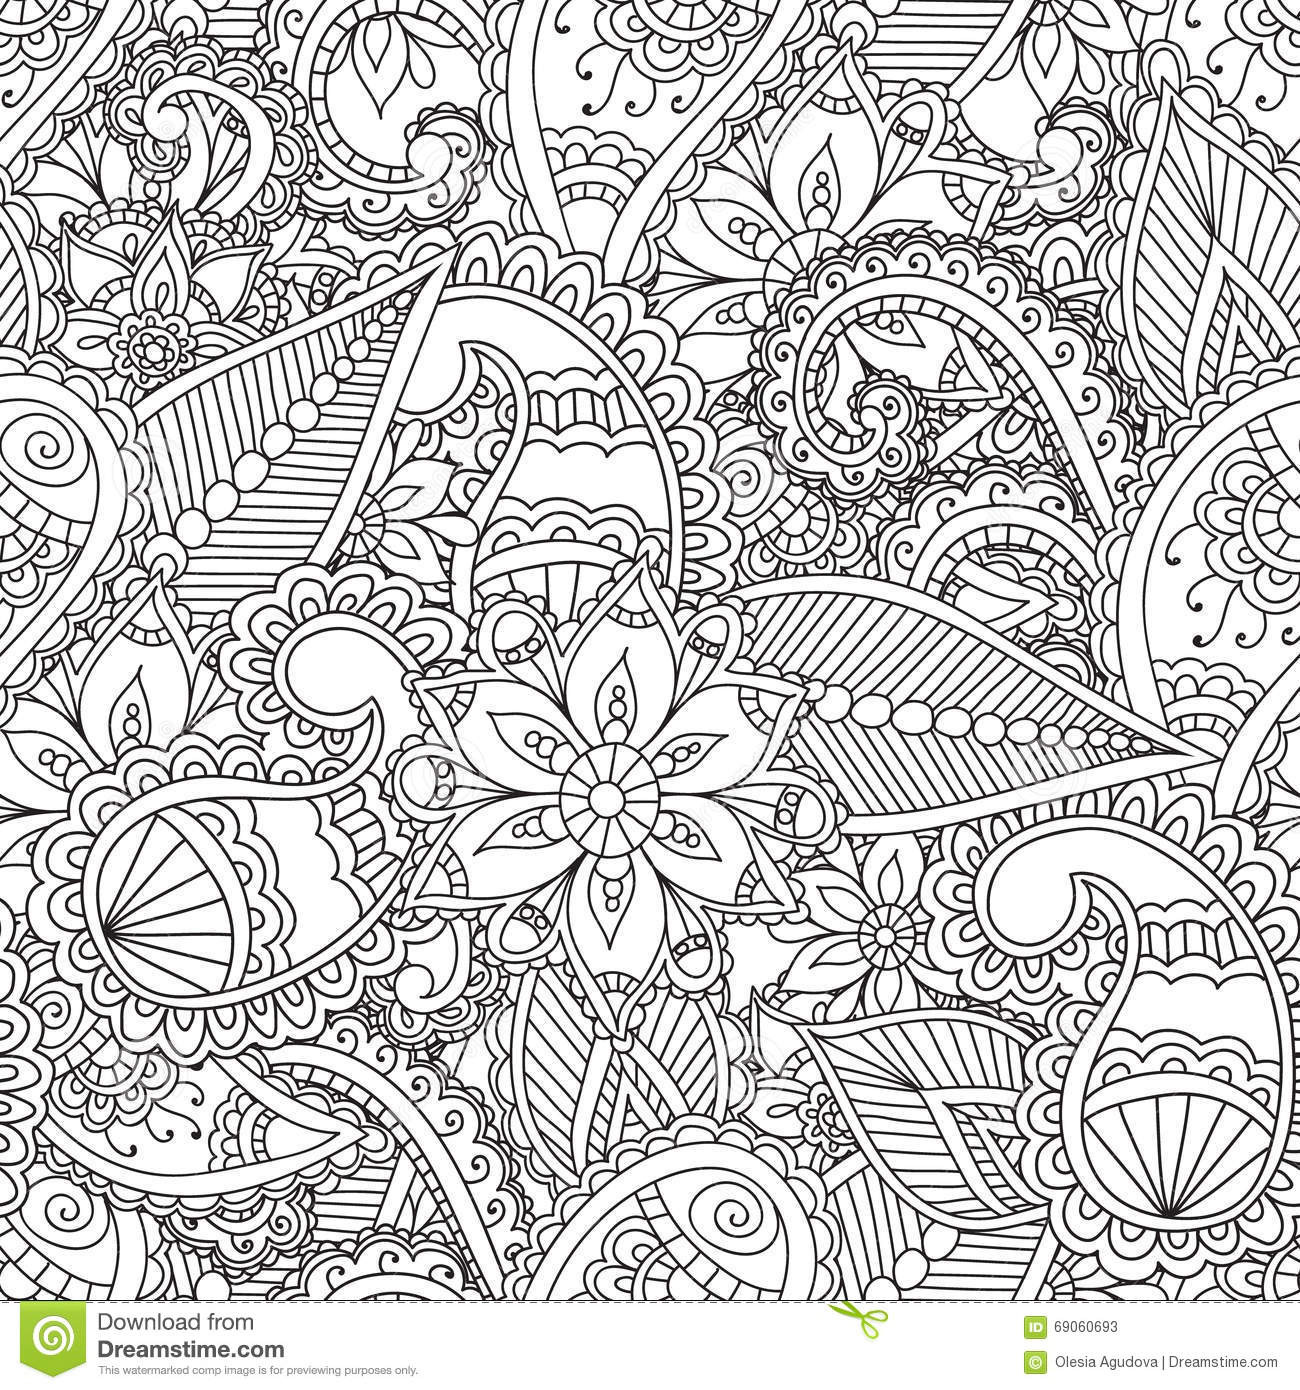 Coloring Pages For Adults Patterns
 Coloring pages for adults stock vector Illustration of